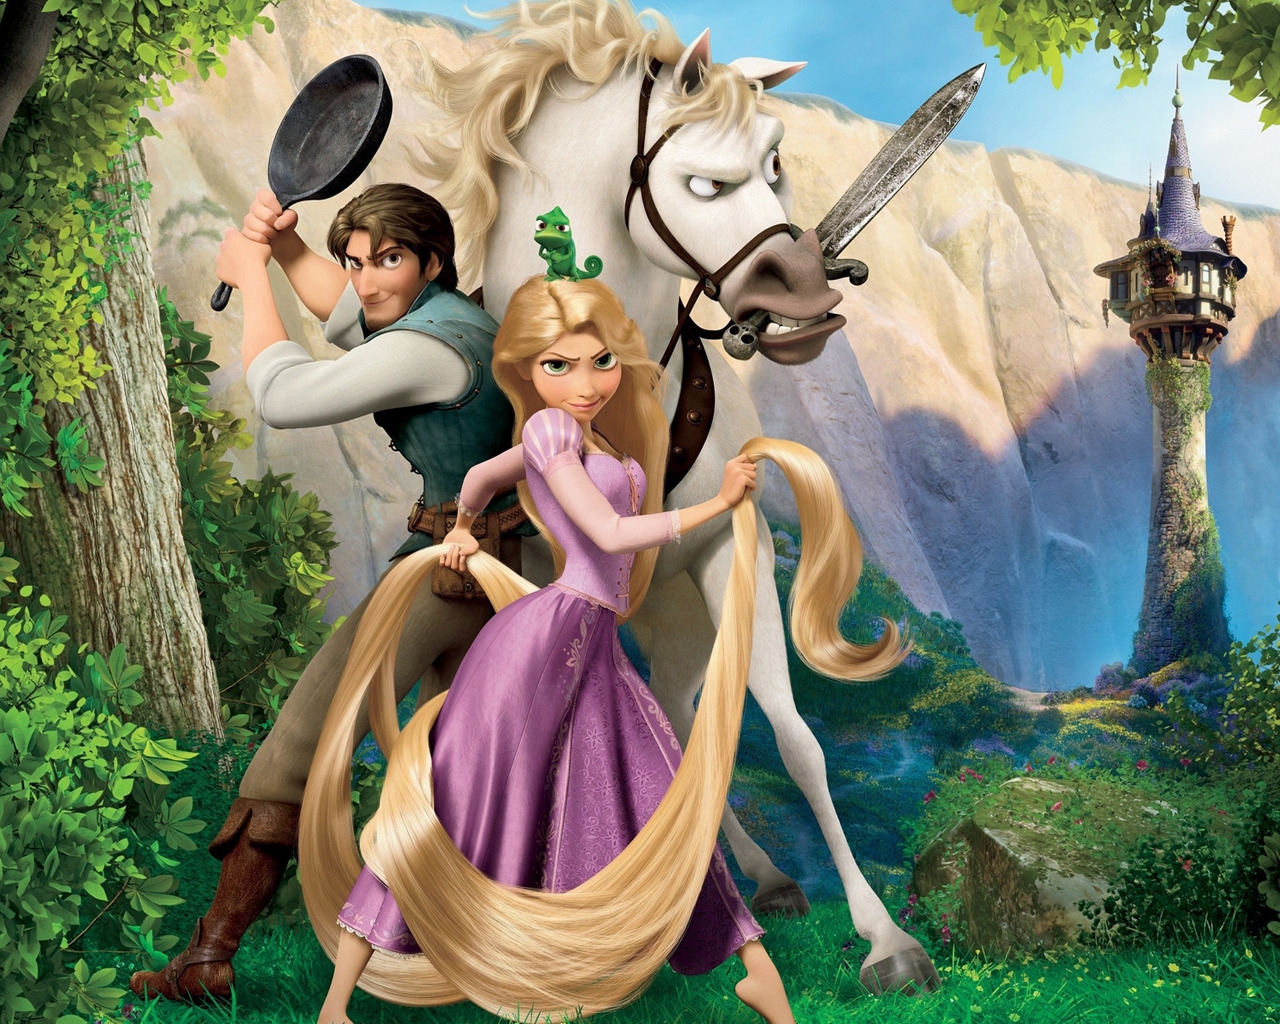 Tangled Animated Musical Film for 1280 x 1024 resolution